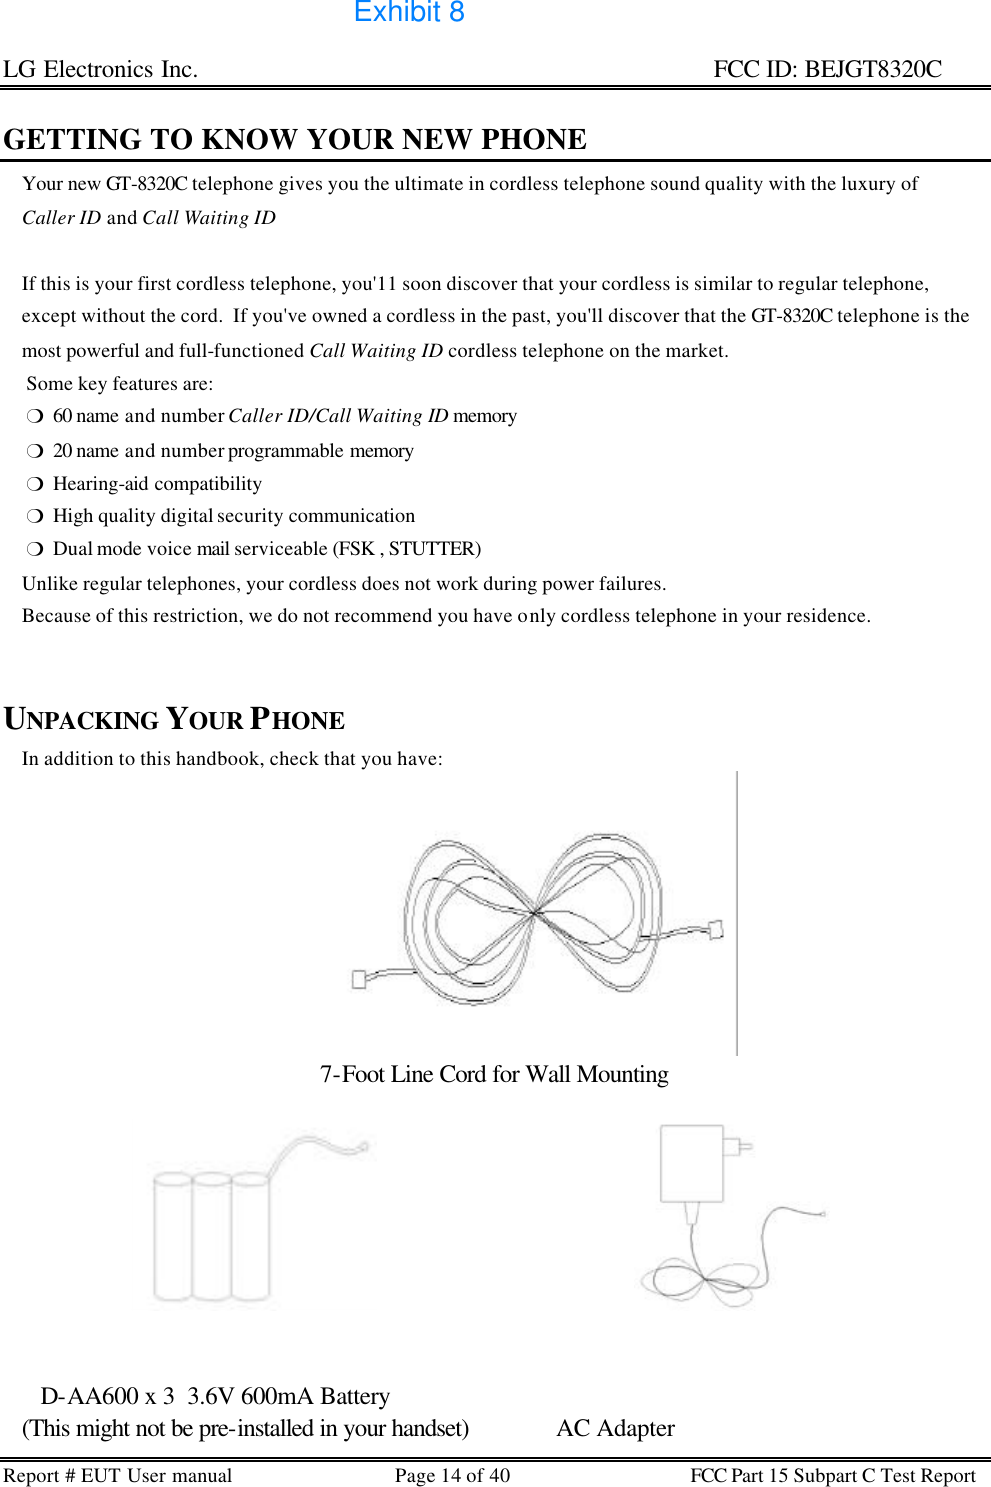 LG Electronics Inc.                                                                                                   FCC ID: BEJGT8320C Report # EUT User manual Page 14 of 40 FCC Part 15 Subpart C Test Report   GETTING TO KNOW YOUR NEW PHONE     Your new GT-8320C telephone gives you the ultimate in cordless telephone sound quality with the luxury of      Caller ID and Call Waiting ID        If this is your first cordless telephone, you&apos;11 soon discover that your cordless is similar to regular telephone,      except without the cord.  If you&apos;ve owned a cordless in the past, you&apos;ll discover that the GT-8320C telephone is the     most powerful and full-functioned Call Waiting ID cordless telephone on the market.      Some key features are:      m  60 name and number Caller ID/Call Waiting ID memory       m  20 name and number programmable memory      m  Hearing-aid compatibility      m  High quality digital security communication      m  Dual mode voice mail serviceable (FSK , STUTTER)     Unlike regular telephones, your cordless does not work during power failures.       Because of this restriction, we do not recommend you have only cordless telephone in your residence.       UNPACKING YOUR PHONE     In addition to this handbook, check that you have: 7-Foot Line Cord for Wall Mounting         D-AA600 x 3  3.6V 600mA Battery    (This might not be pre-installed in your handset)              AC Adapter Exhibit 8